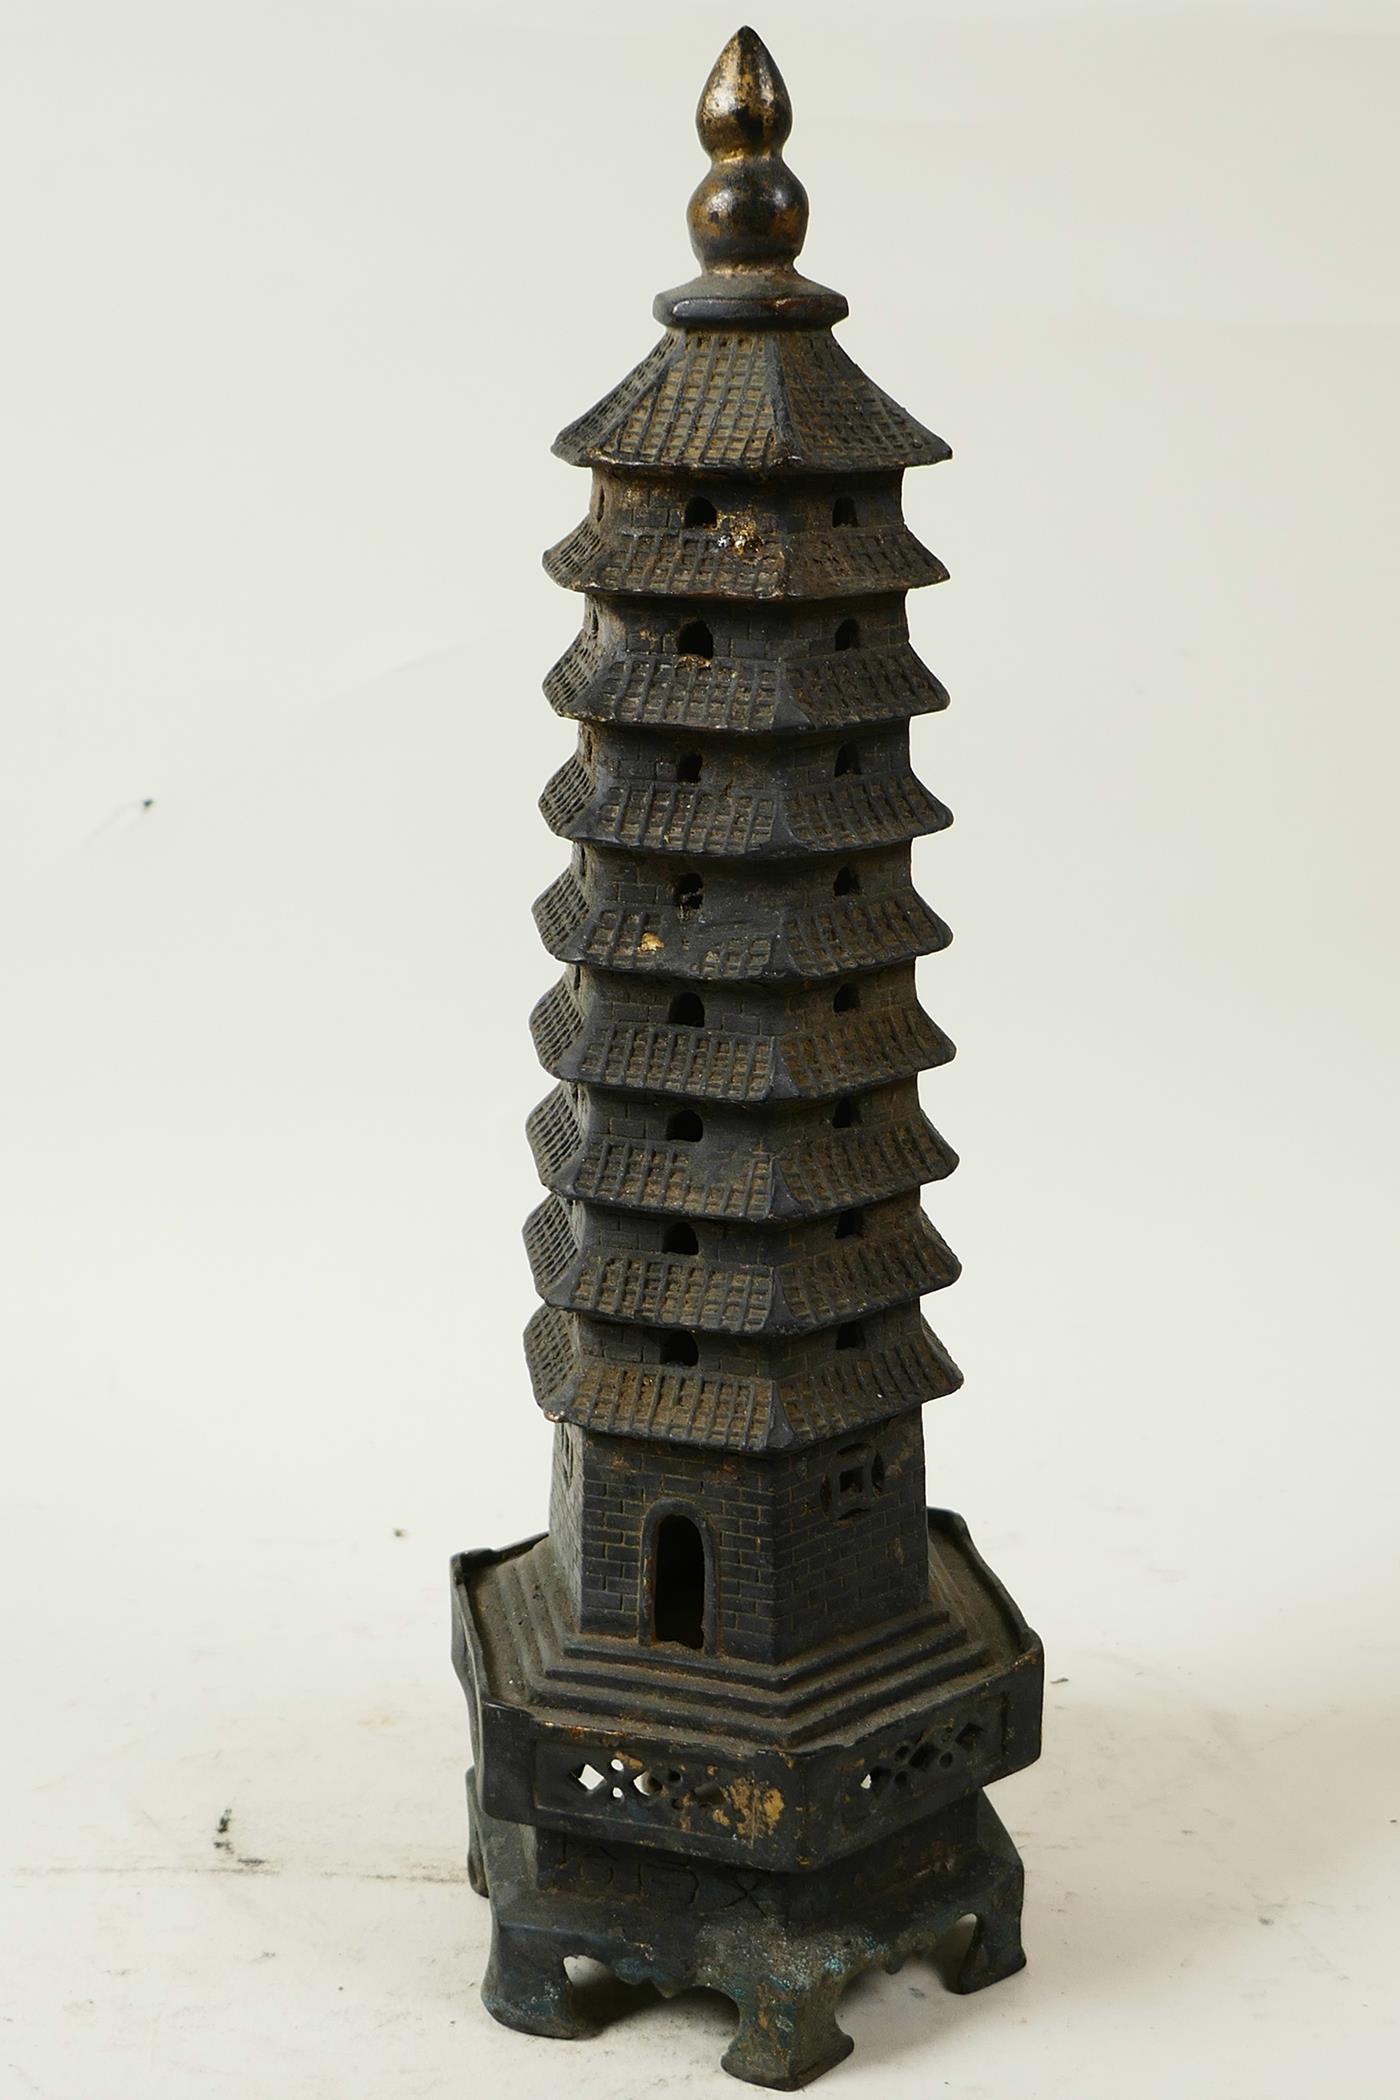 A Chinese bronze model of a tall pagoda, 11¾" high